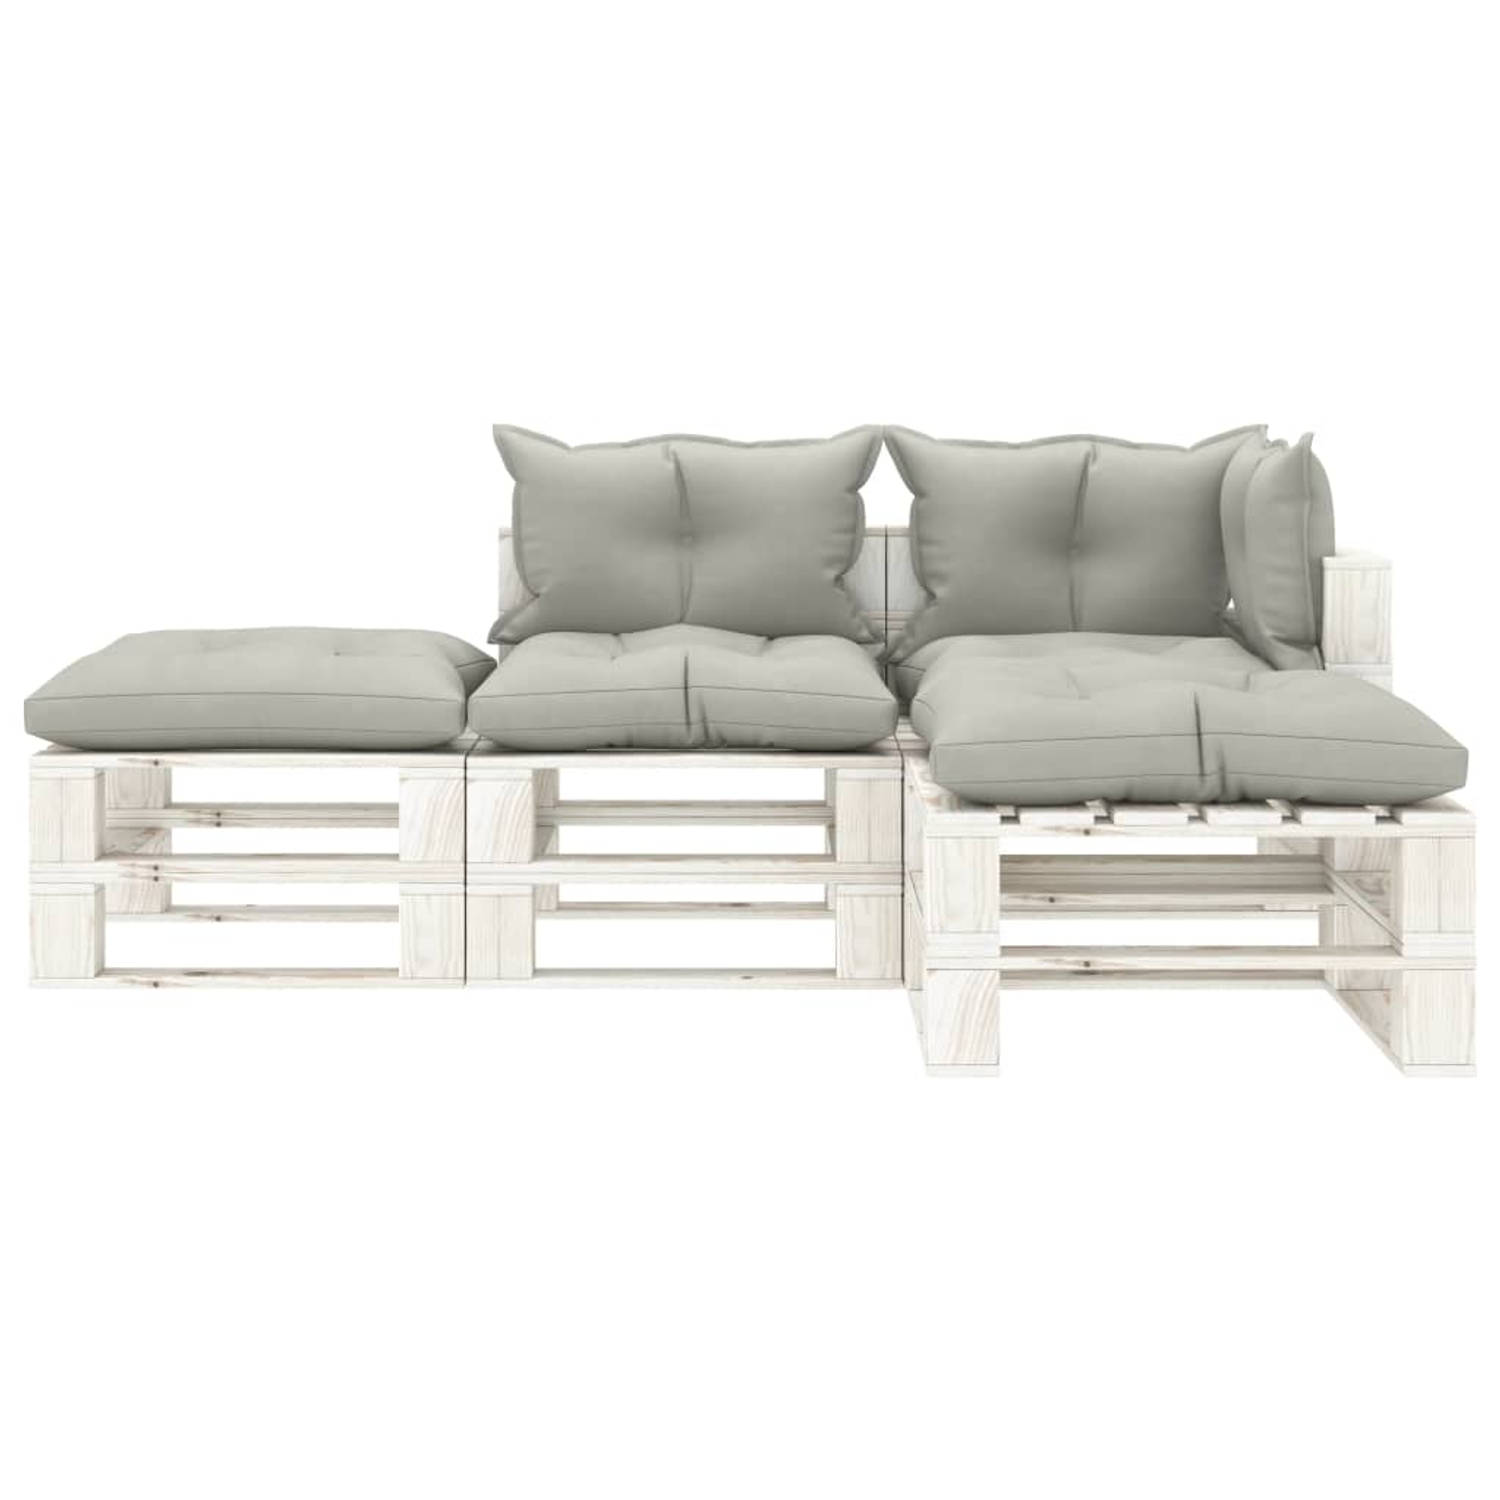 The Living Store 4-delige Loungeset met taupe kussens pallet hout - Tuinset